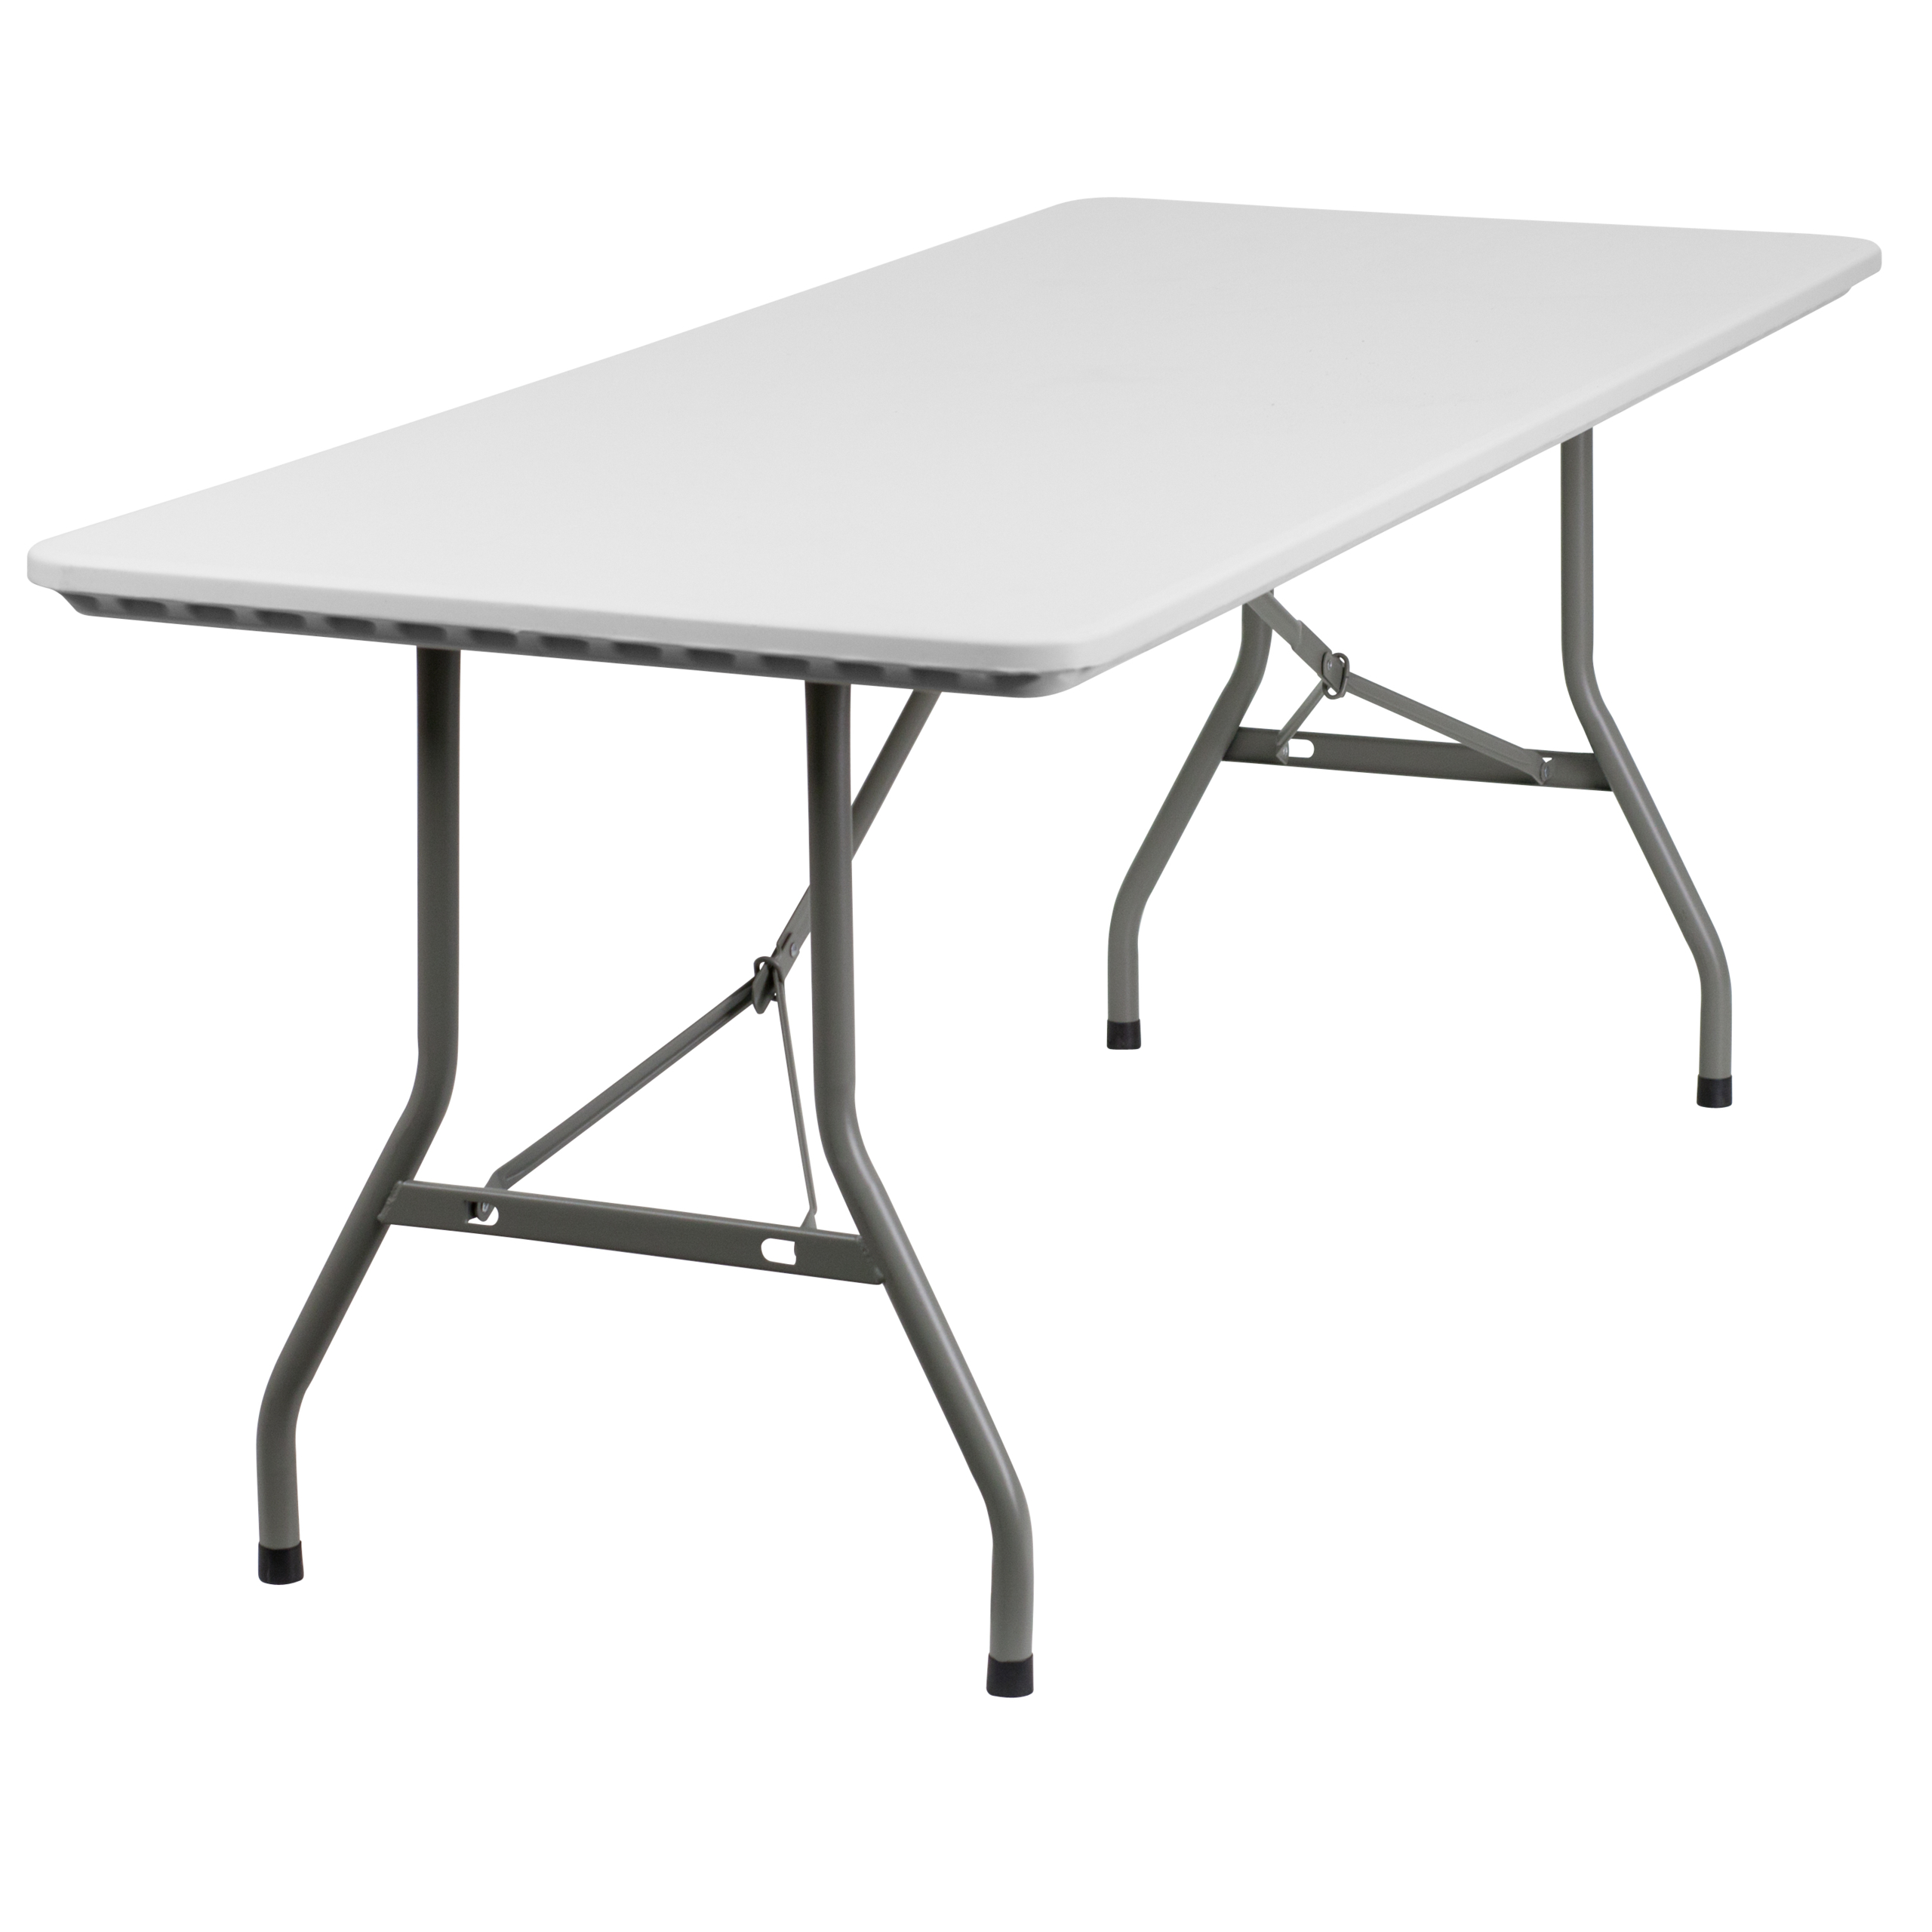 Flash Furniture RB-3072-GG 30-Inch Width by 72-Inch Length Granite Plastic Folding Table, Gray/White